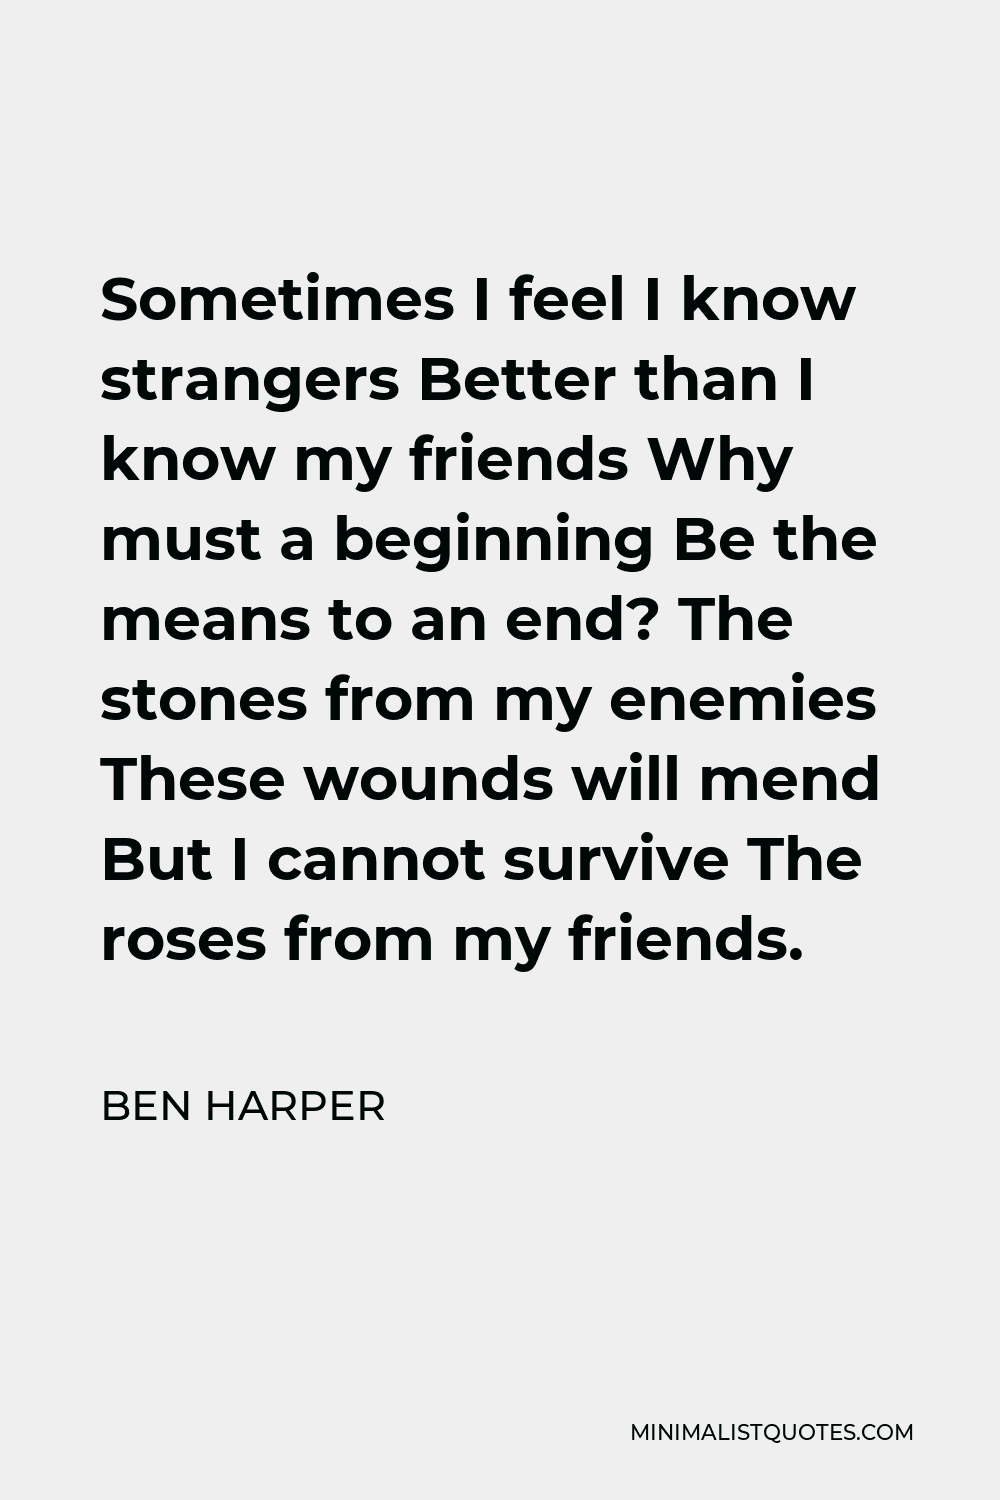 Ben Harper Quote - Sometimes I feel I know strangers Better than I know my friends Why must a beginning Be the means to an end? The stones from my enemies These wounds will mend But I cannot survive The roses from my friends.